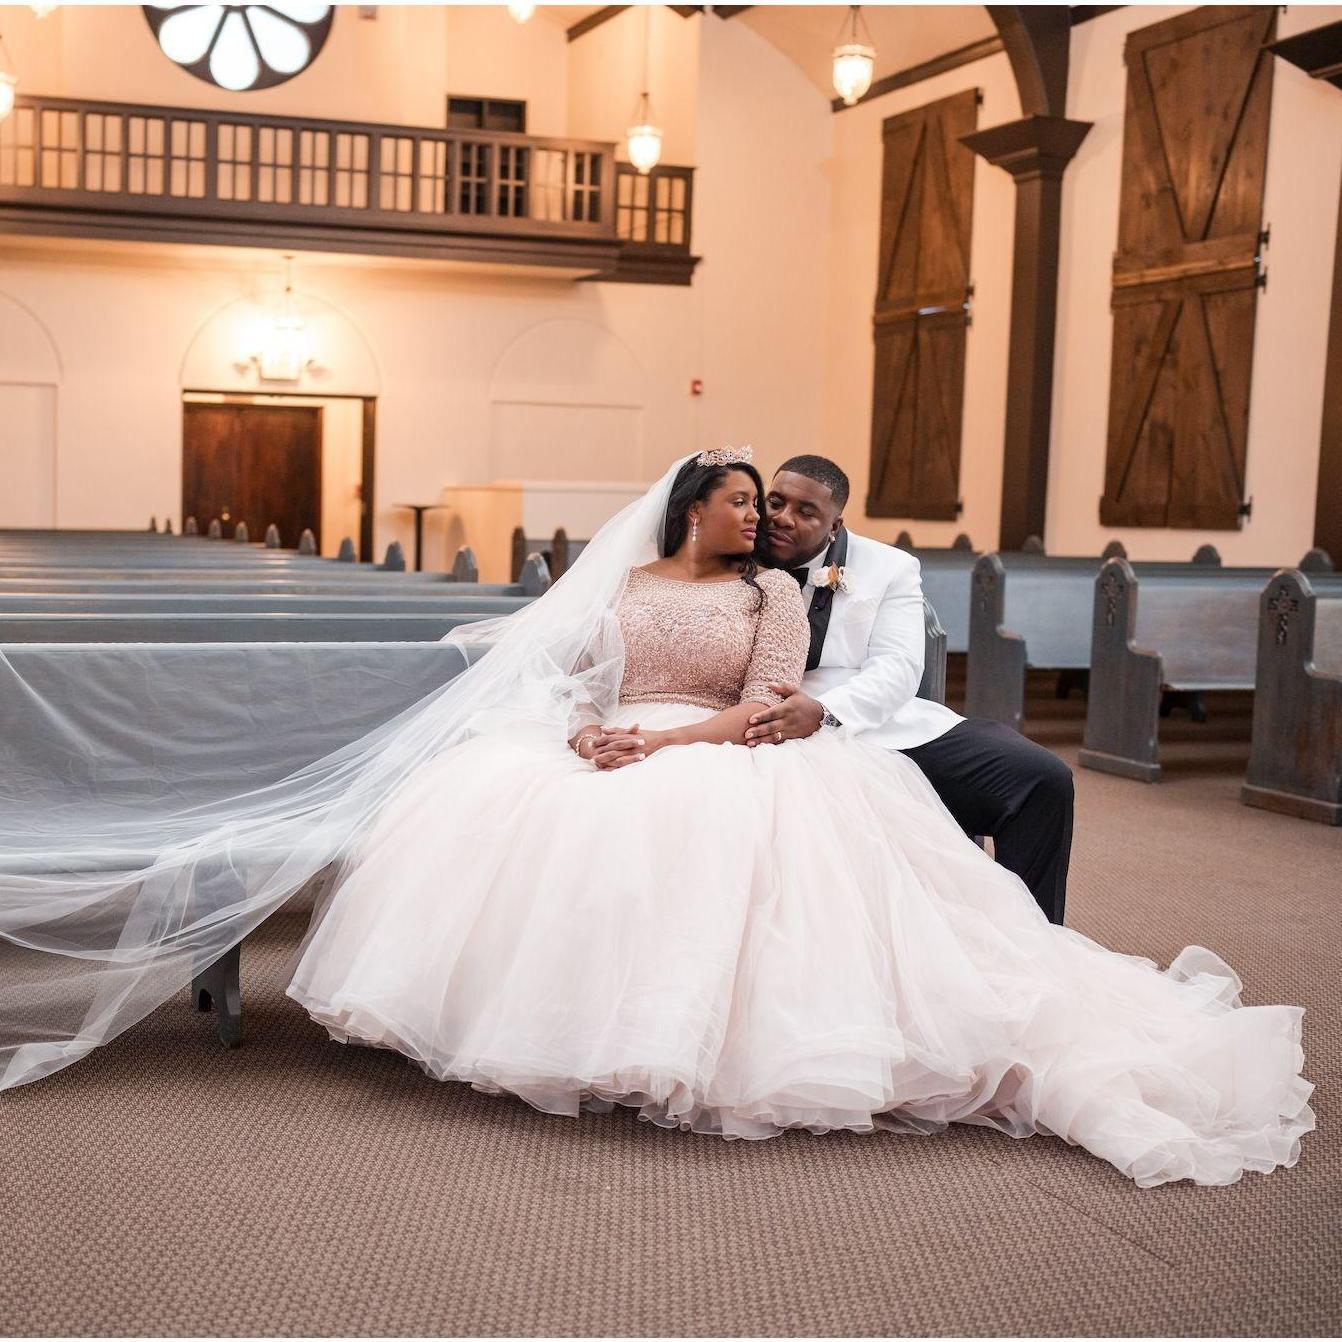 View our professional wedding photos from the special day here: https://photos.app.goo.gl/zgTCSV6m94hCZh2XA

We are adding photos as quick as we can!